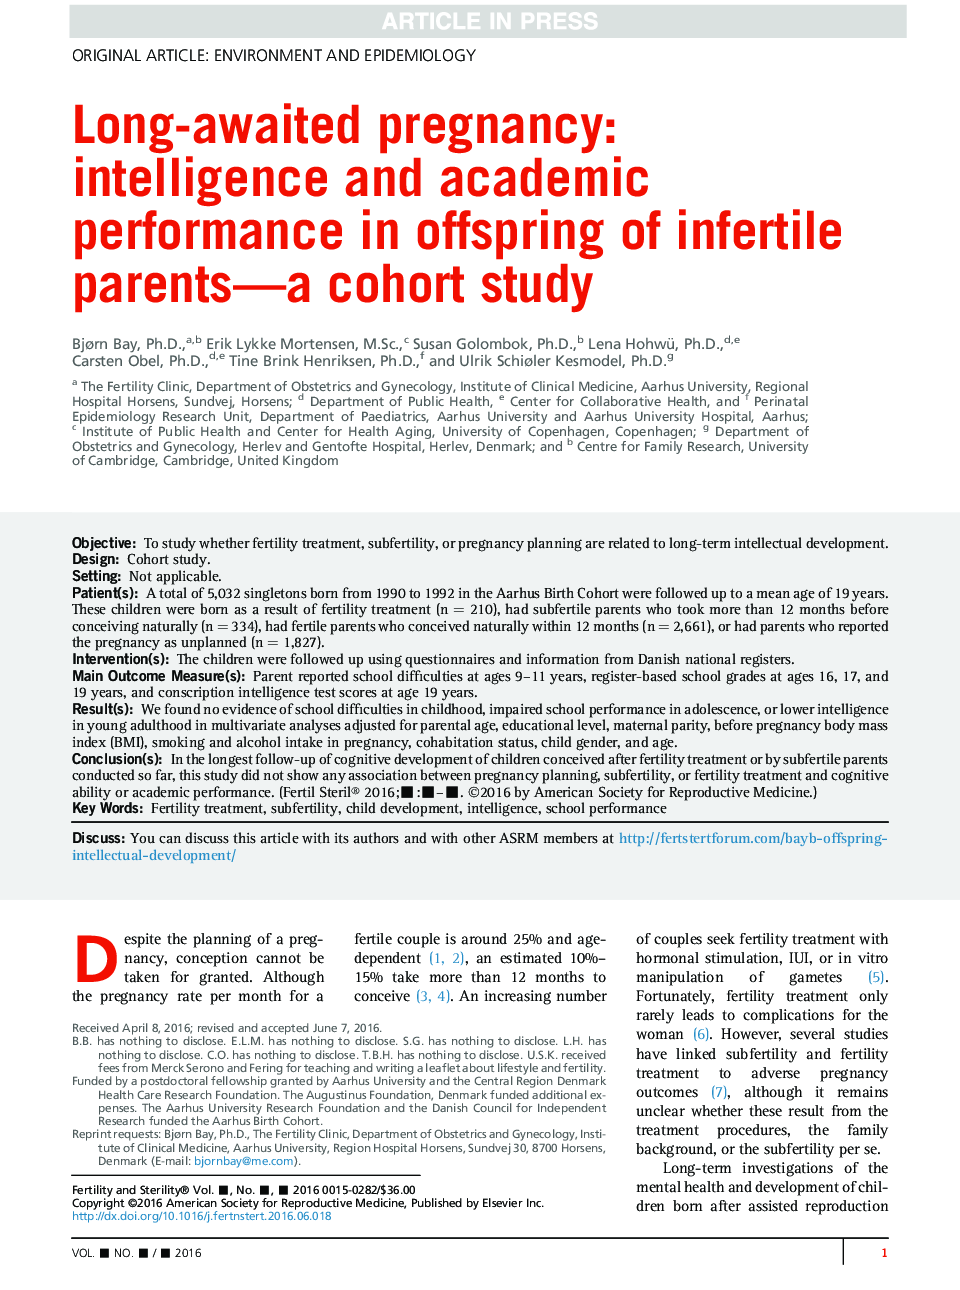 Long-awaited pregnancy: intelligence and academic performance in offspring of infertile parents-a cohort study